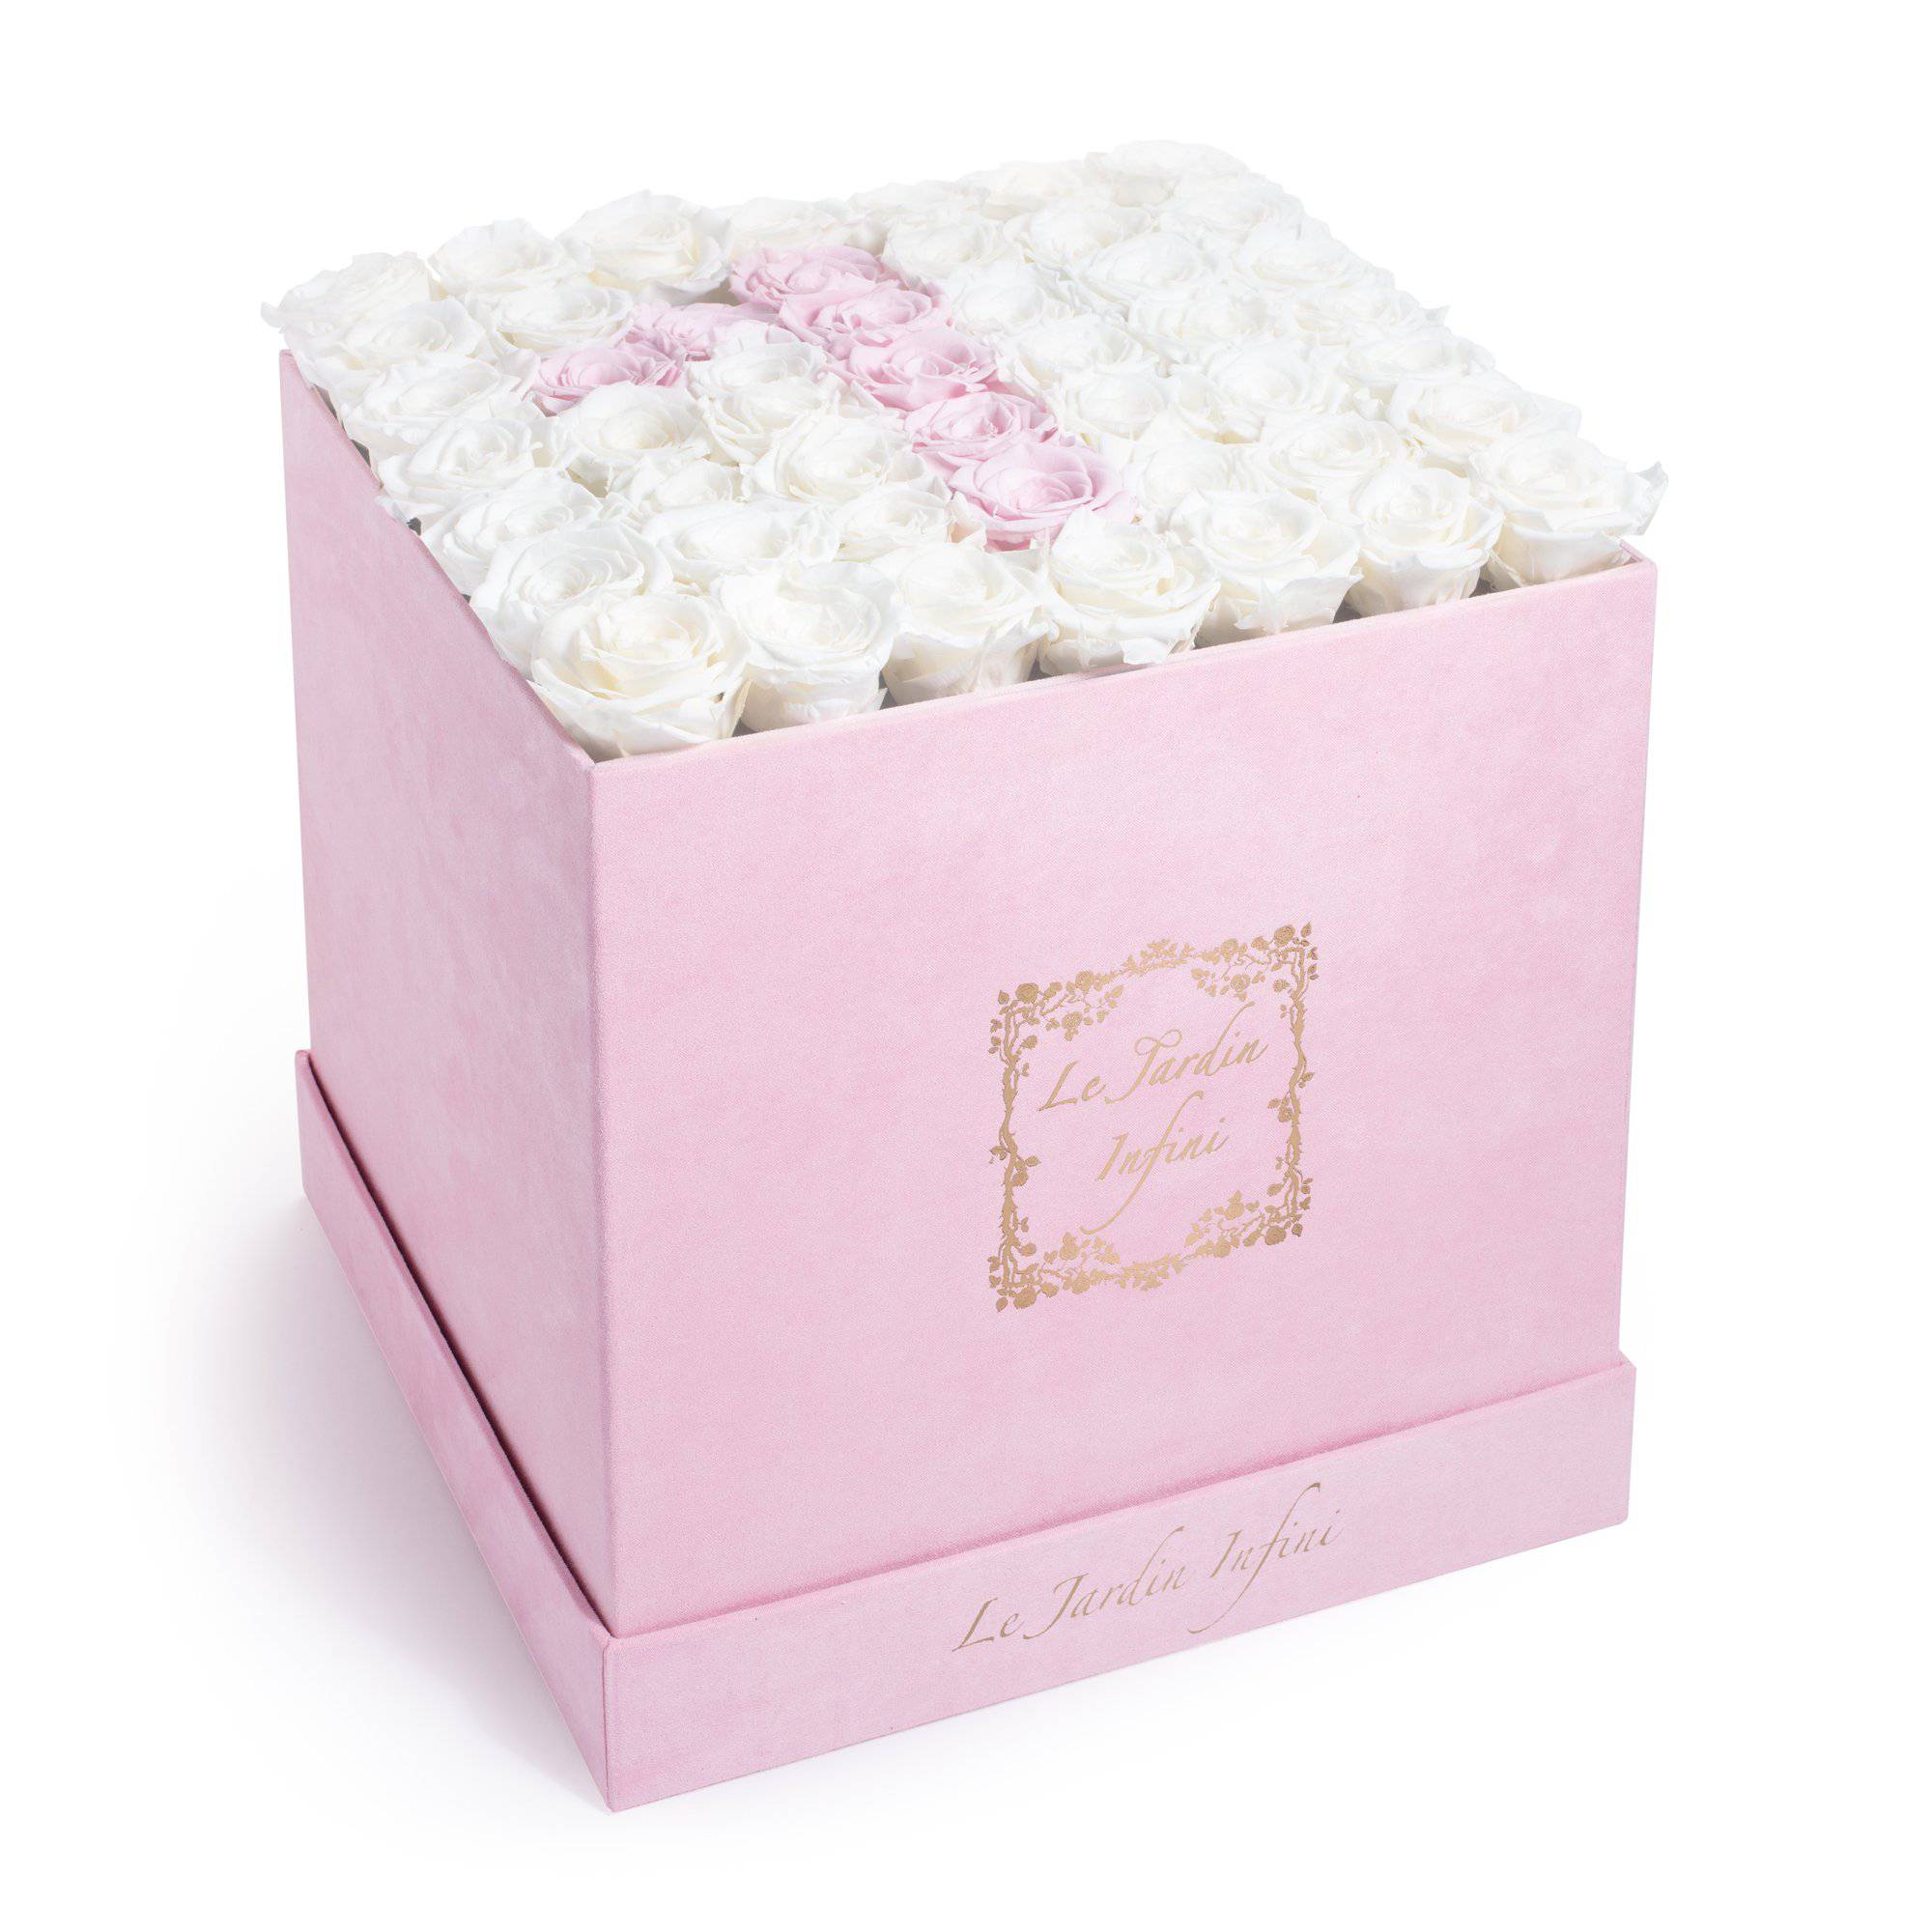 #1 Soft Pink & White Preserved Roses - Large Square Luxury Pink Suede Box - Le Jardin Infini Roses in a Box